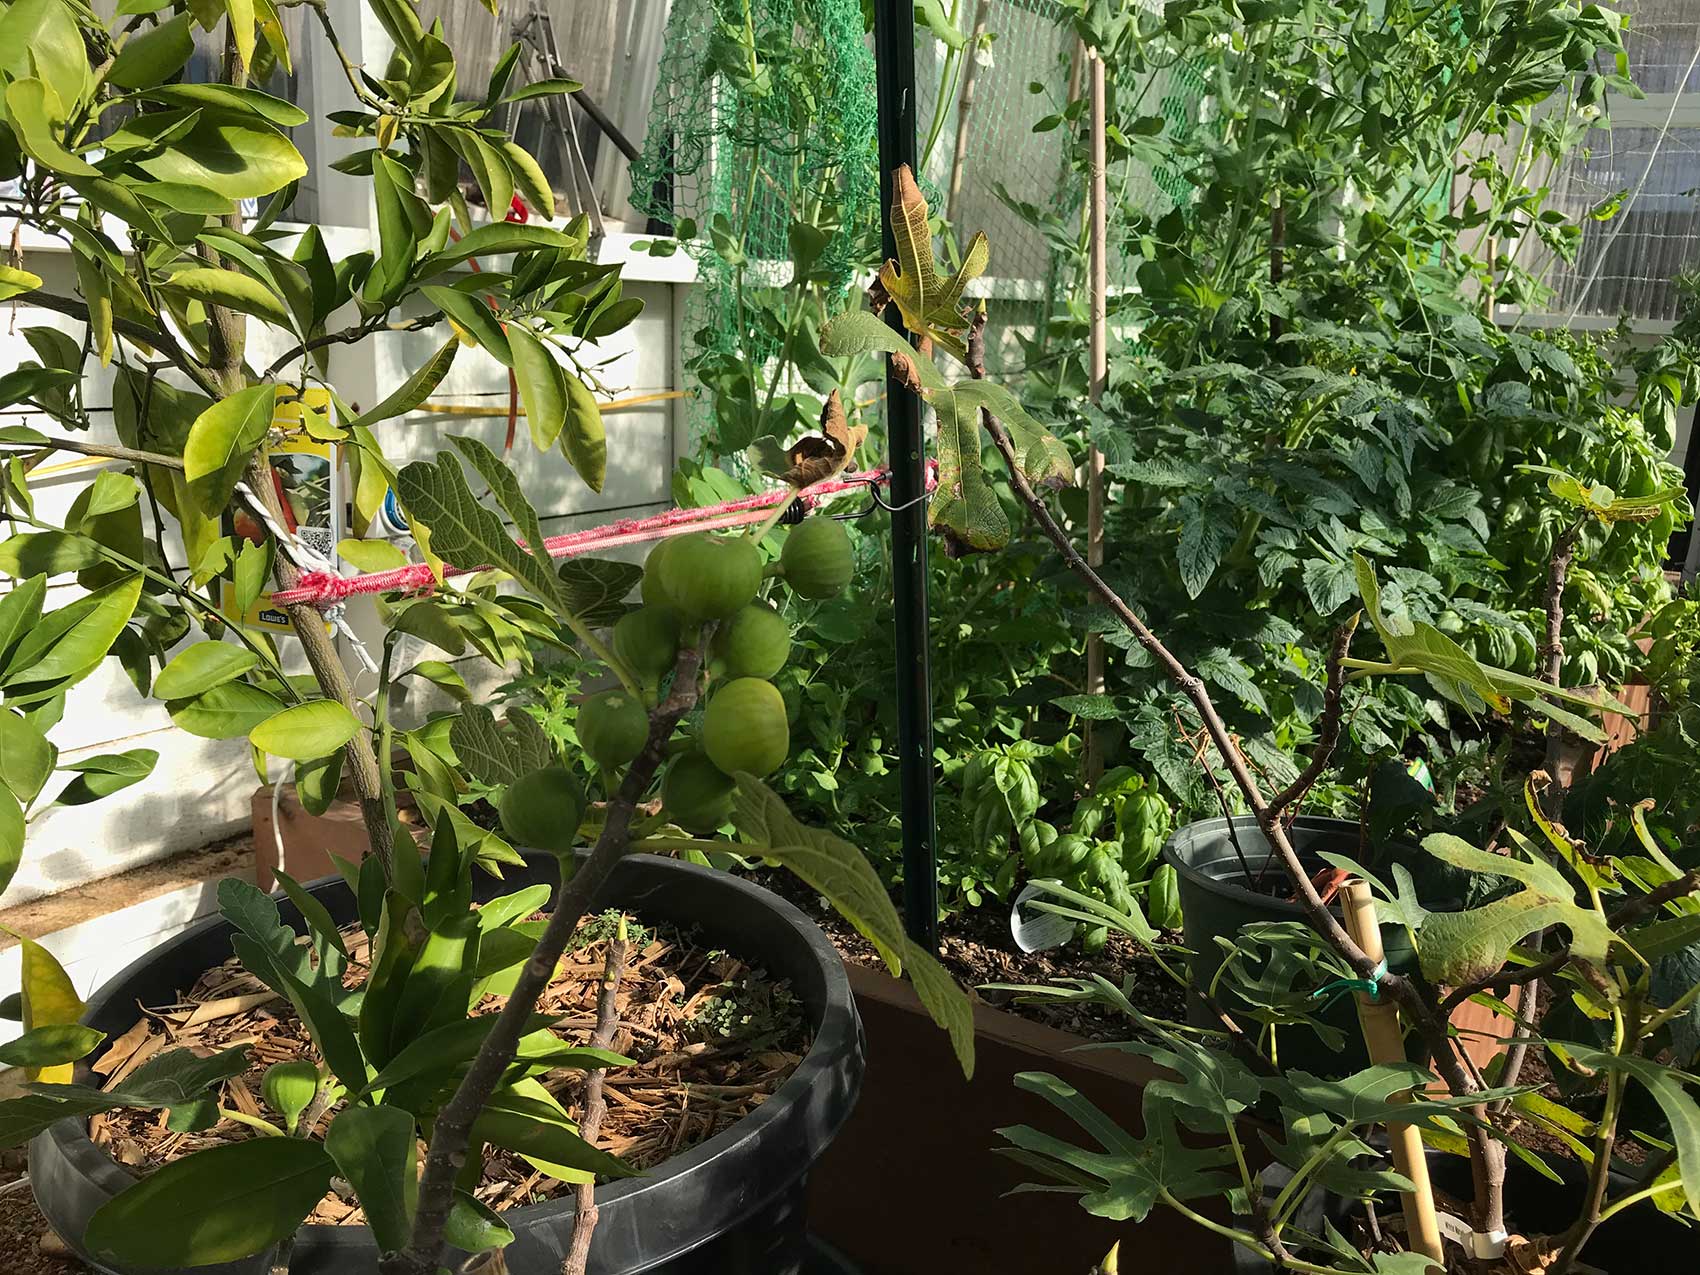 tomatoes and snap peas in the greenhouse